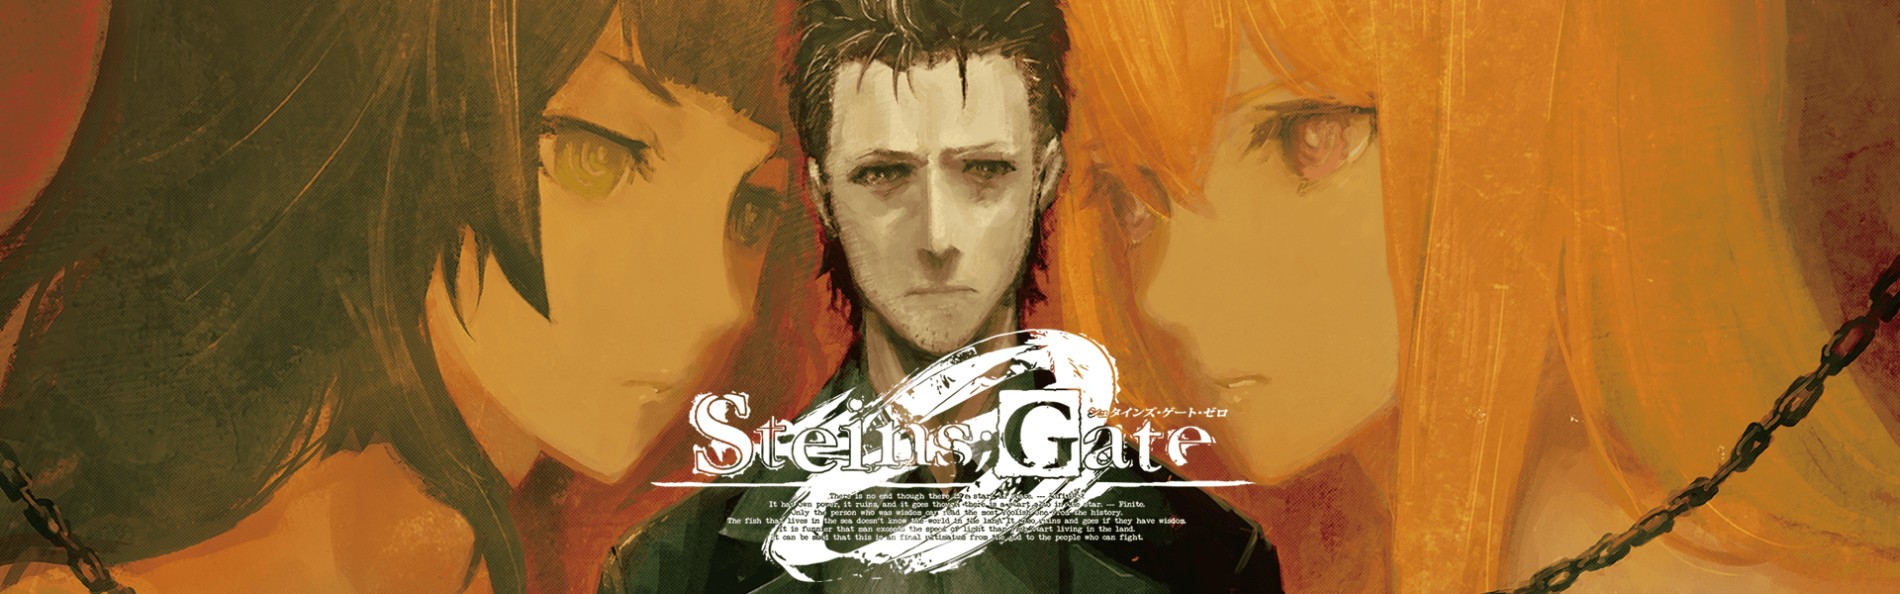 Anime Like Steins;Gate 0: Valentine's of Crystal Polymorphism